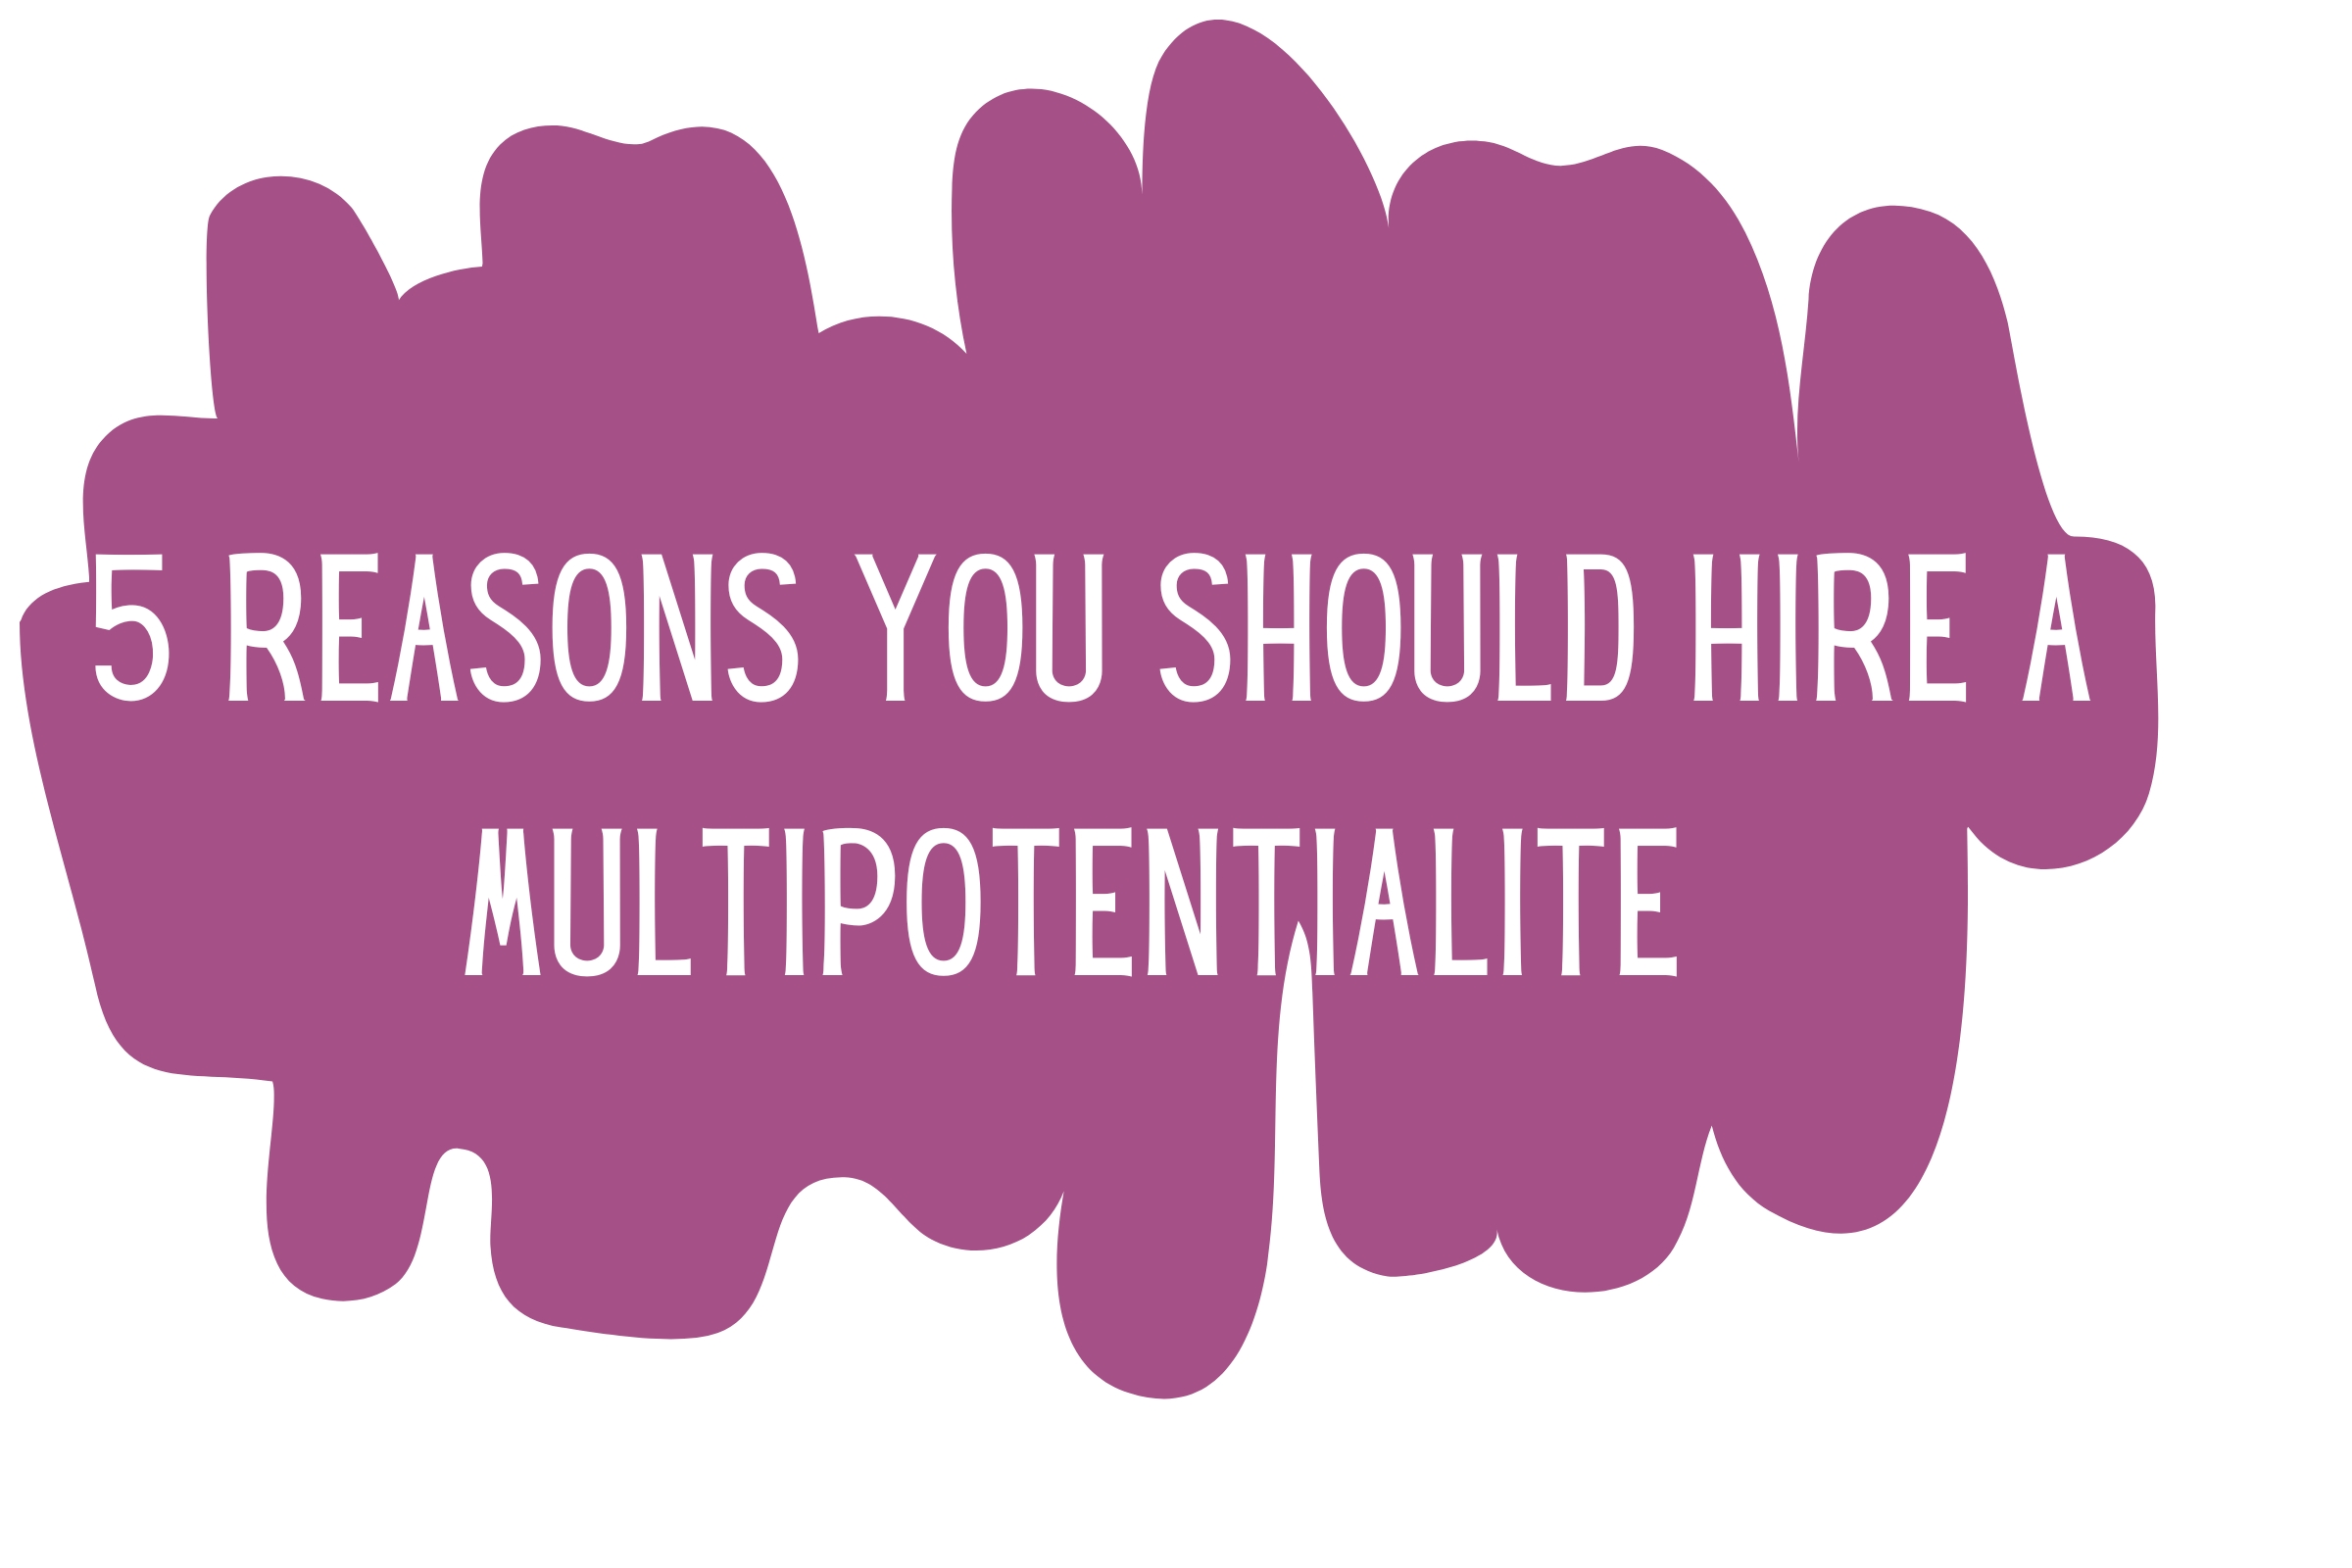 5 Reasons You Should Hire A Multipotentialite